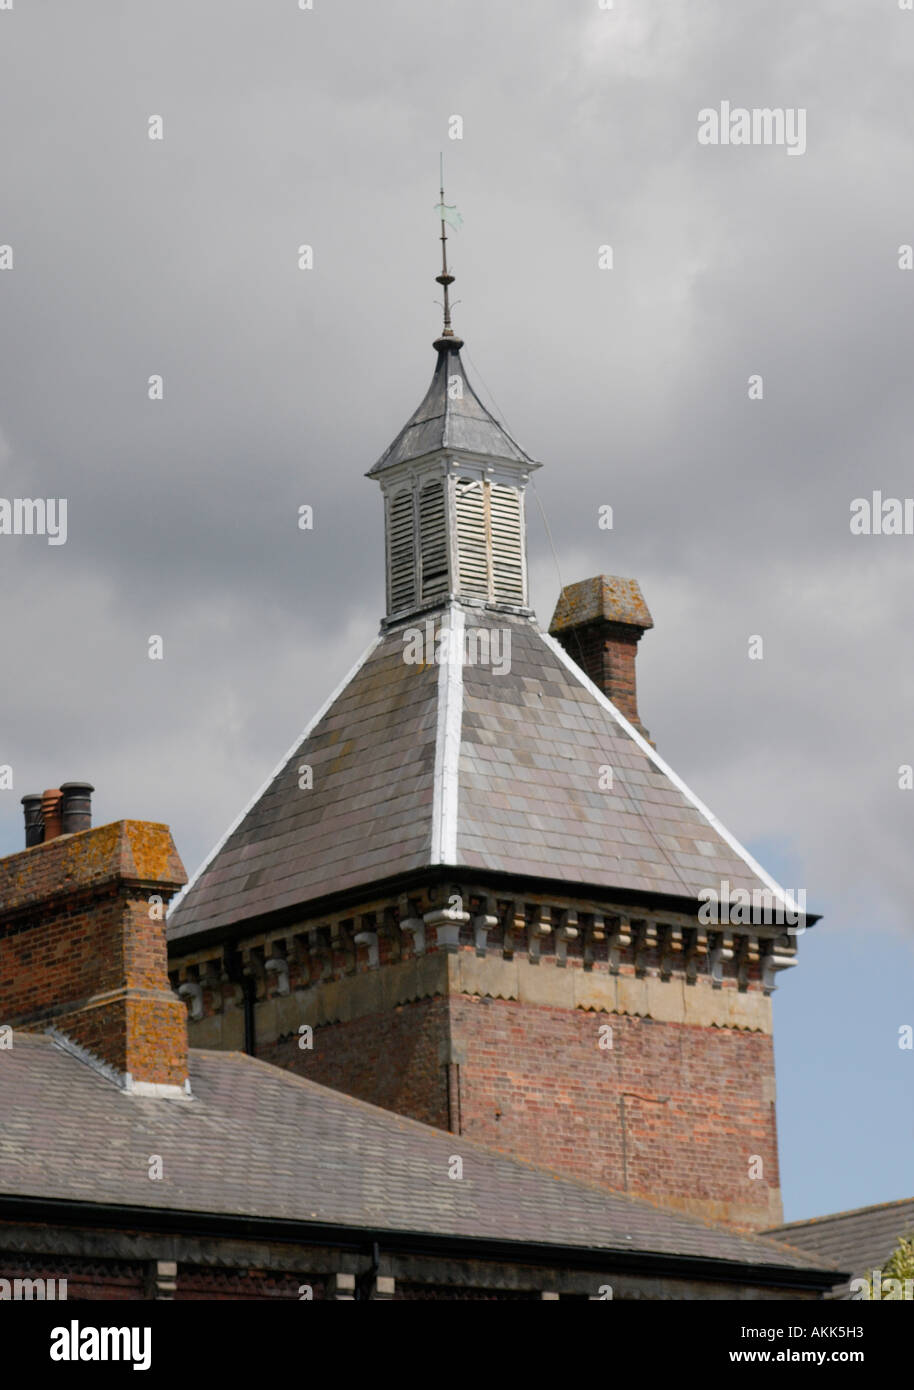 Tower of the old Tunbridge Wells West Station now part of a restaurant chain Stock Photo